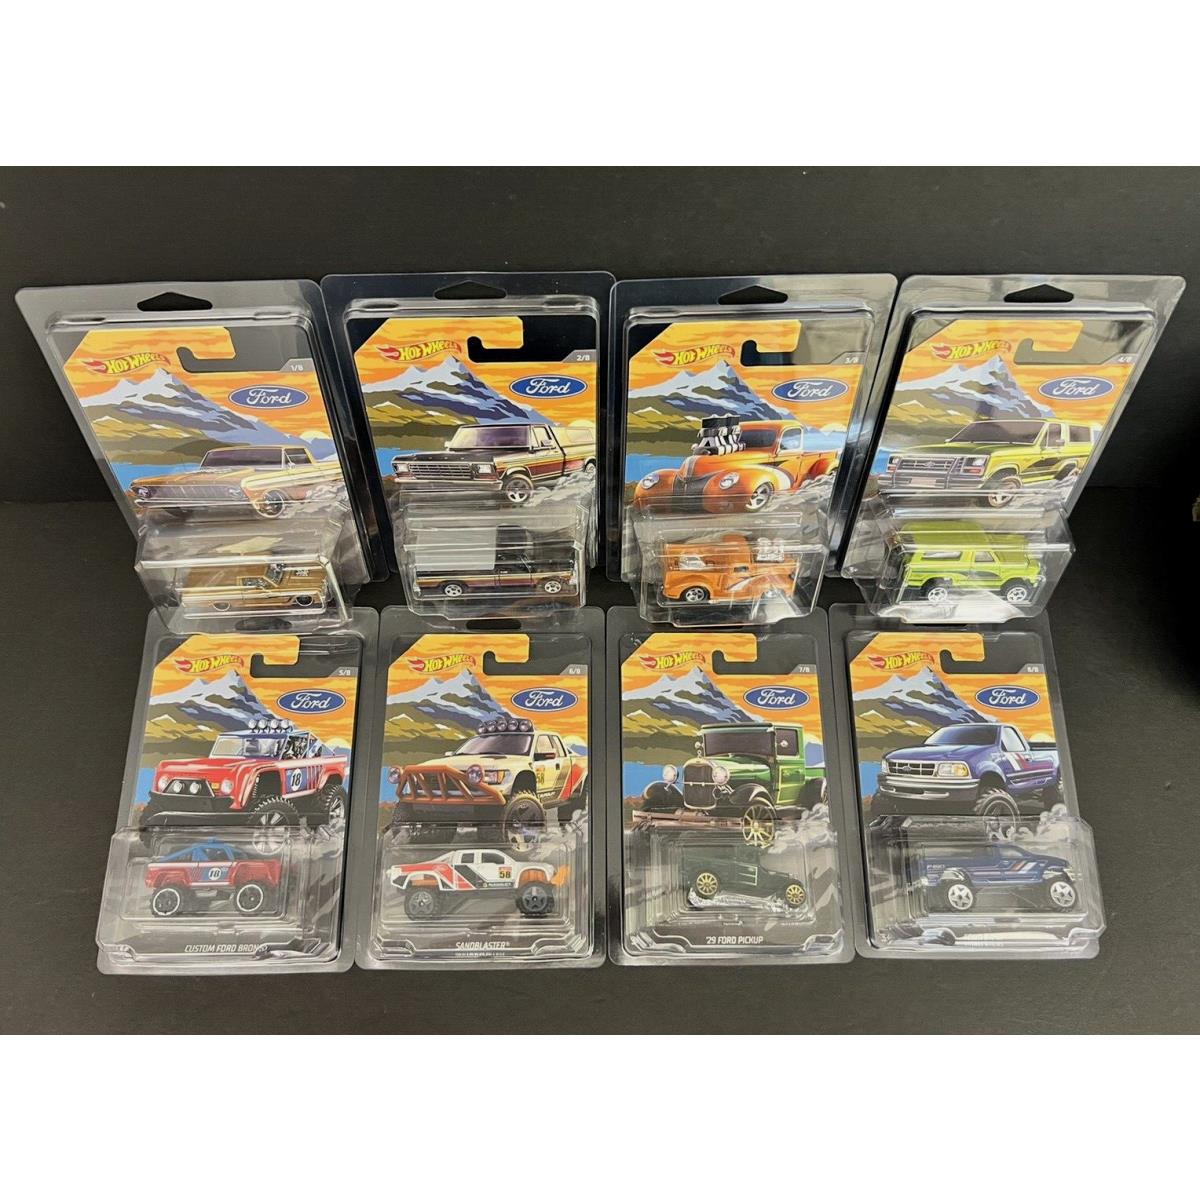 Hot Wheels 2018 Walmart Exclusive Set of 8 W/protector Cases Ford Box Ships